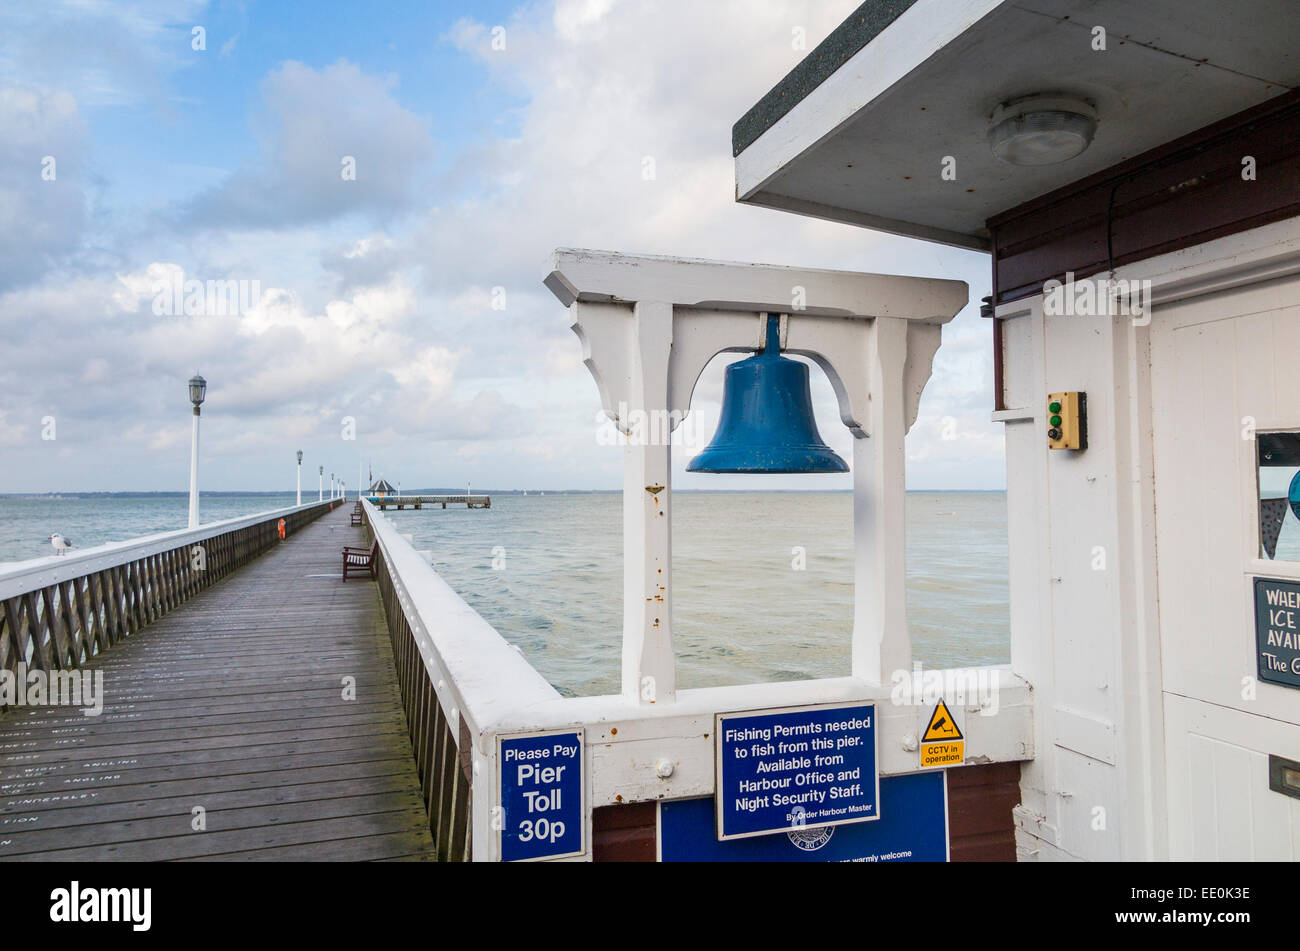 Blue bell at the entrance to the traditional old-fashioned Yarmouth Pier, Yarmouth, Isle of Wight coast, UK, overlooking the Solent Stock Photo